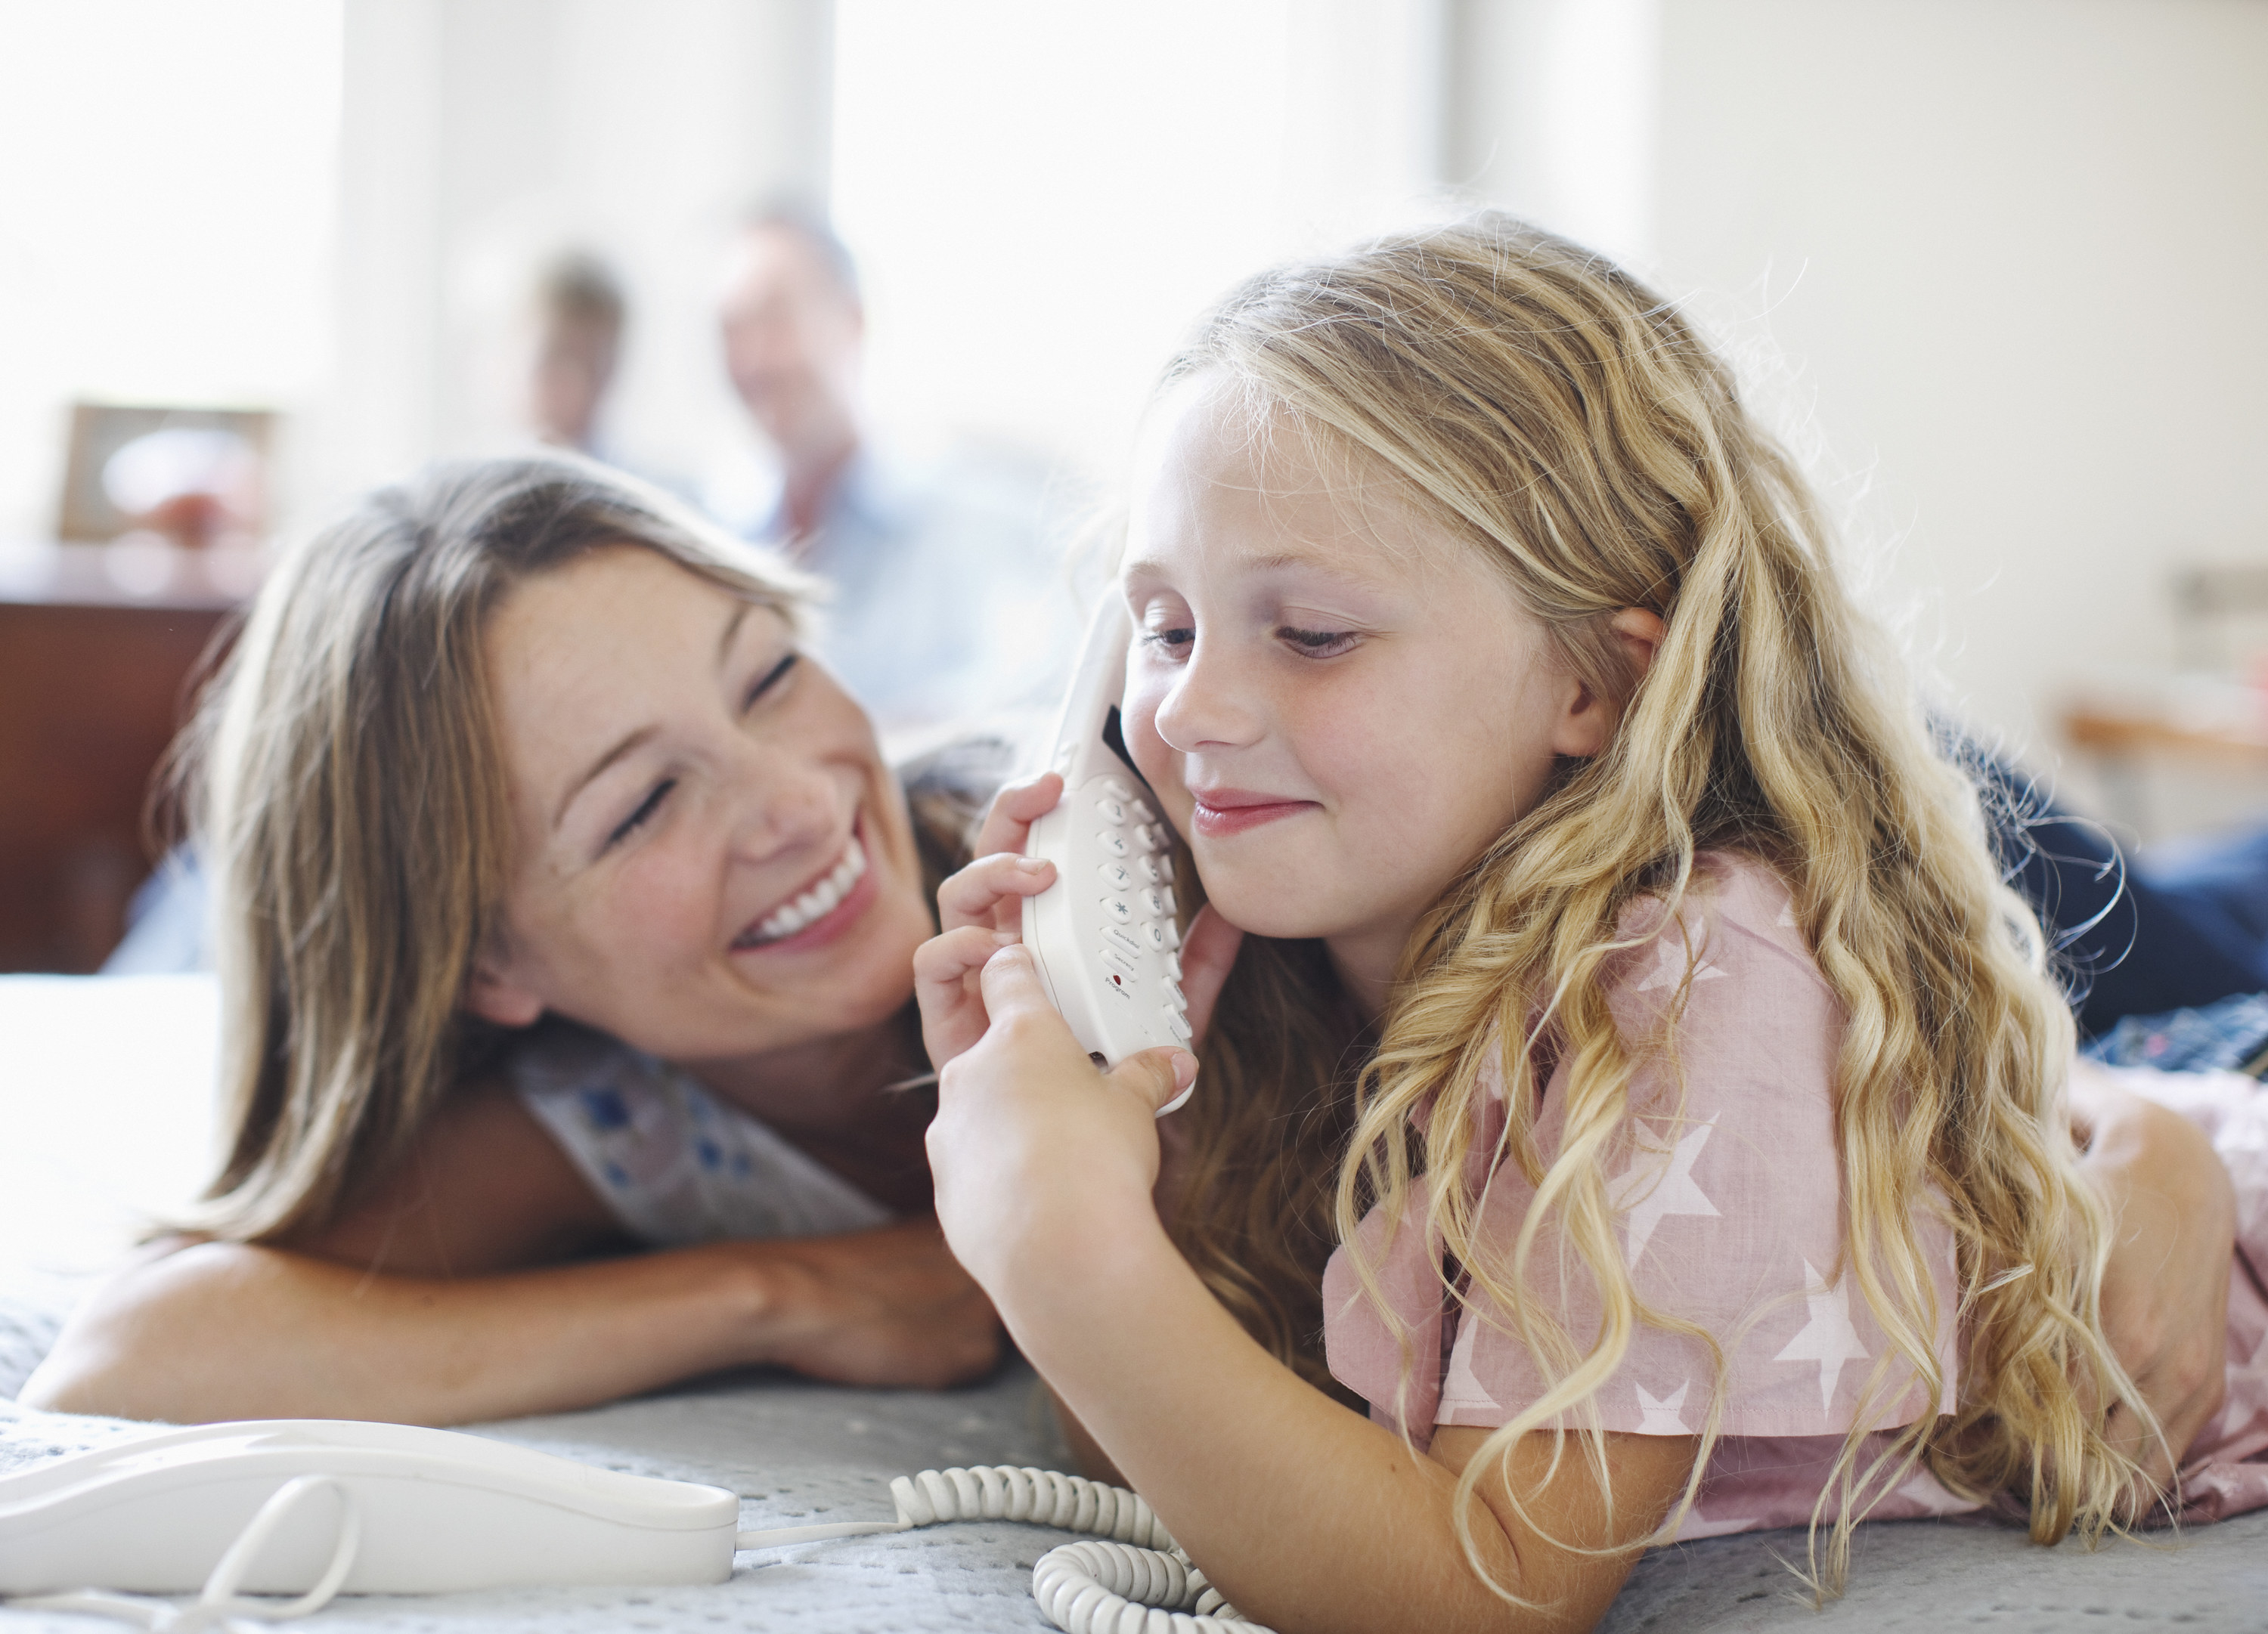 A woman smiles as her daughter talks on a landline telephone